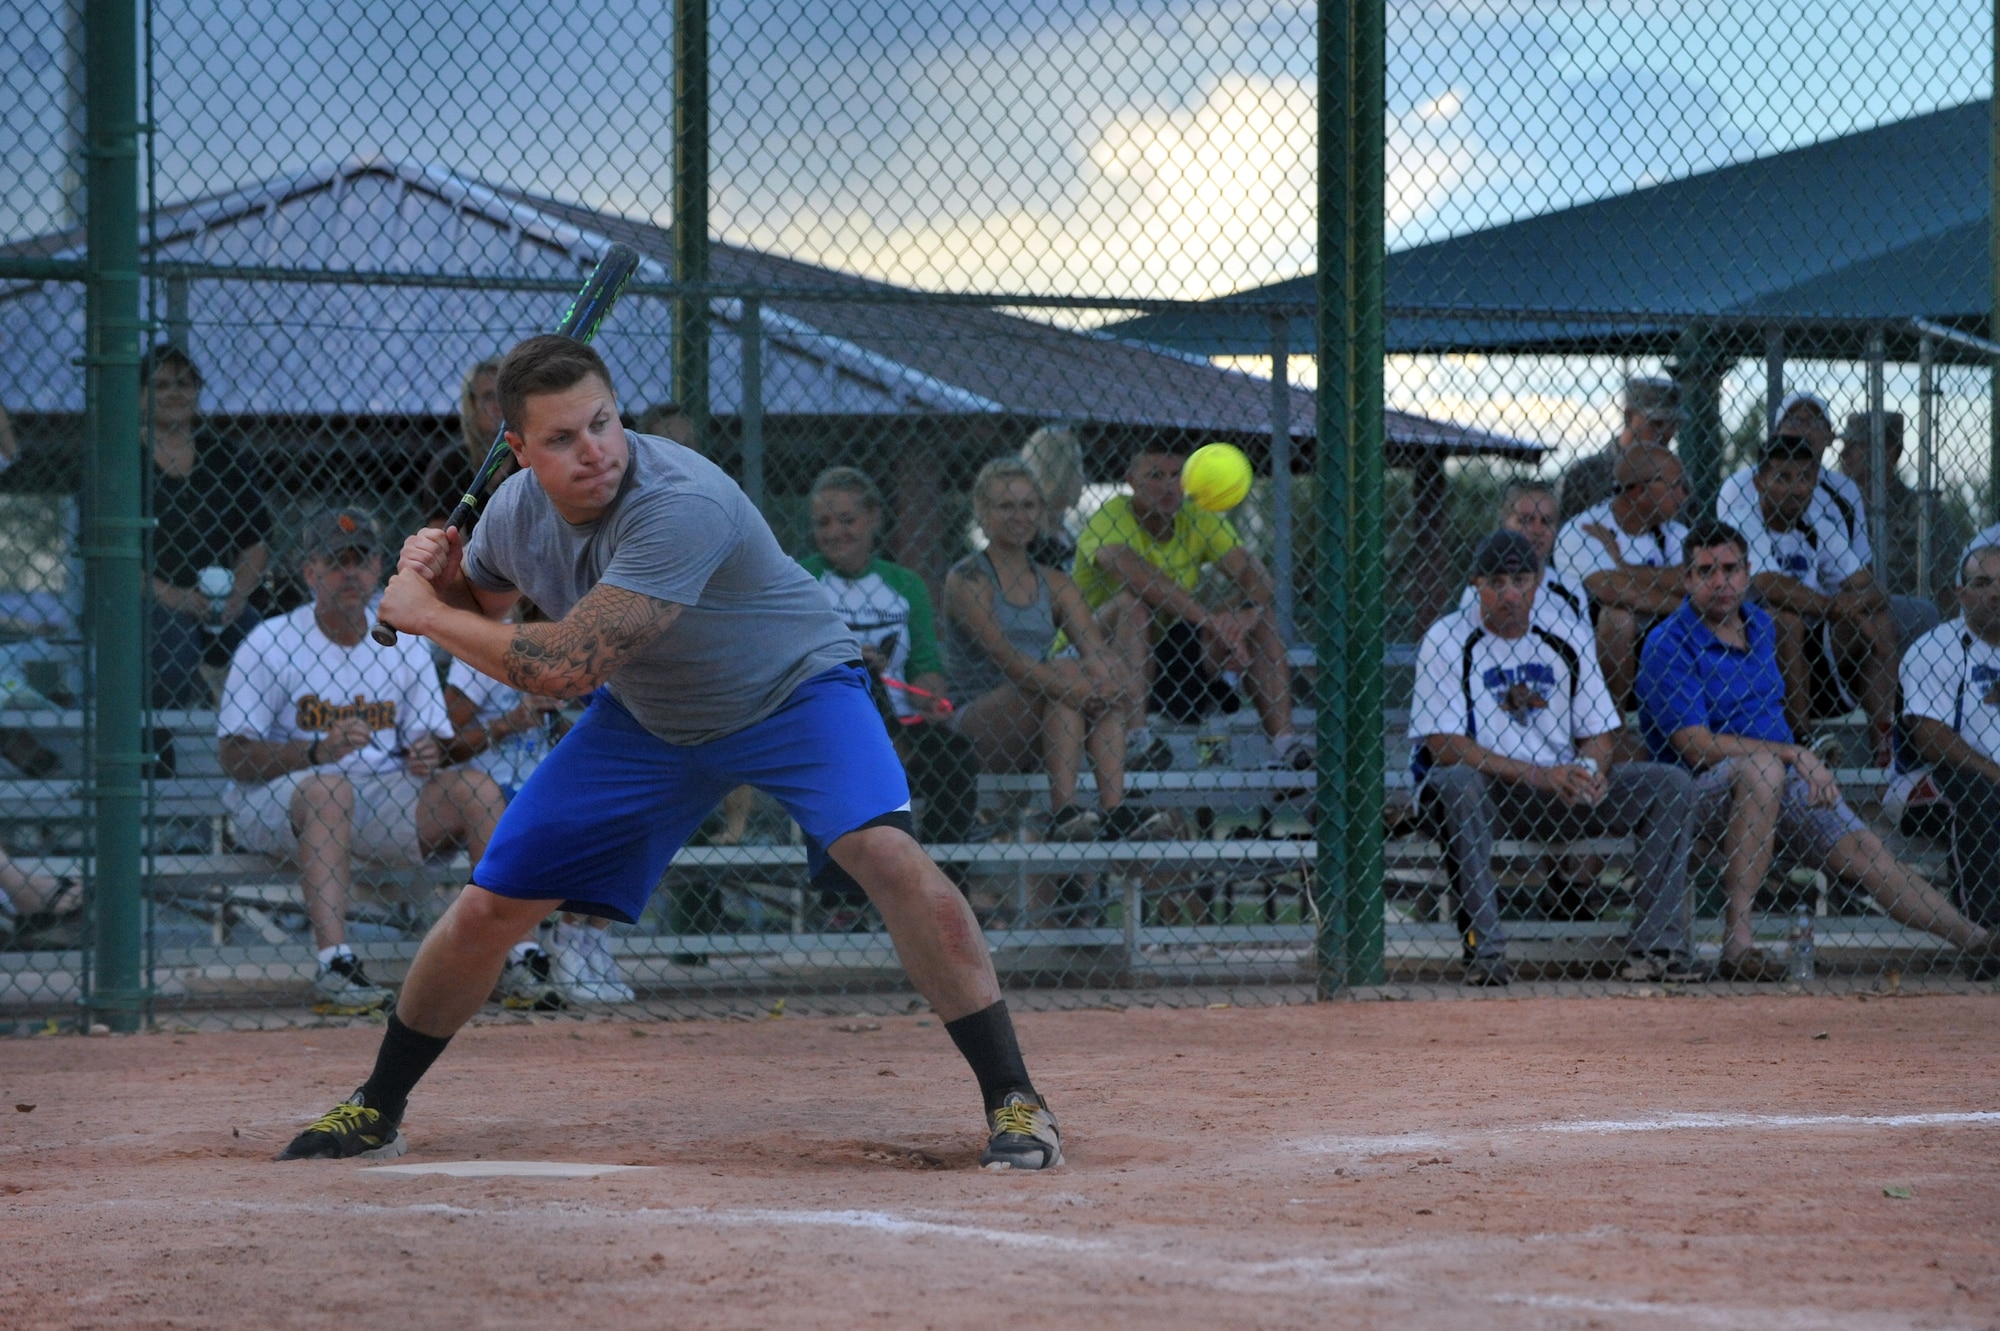 Ryan Mullan, 460th Space Wing Staff softball team member, stares down the ball as he prepares to send it over the fence during the championship softball game Aug. 20, 2014 at the softball fields on Buckley Air Force Base, Colo. The final score of the game was 24-9, making the wing staff team the 2014 intramural softball base champions. (U.S. Air Force photo by Airman Emily E. Amyotte/Released)